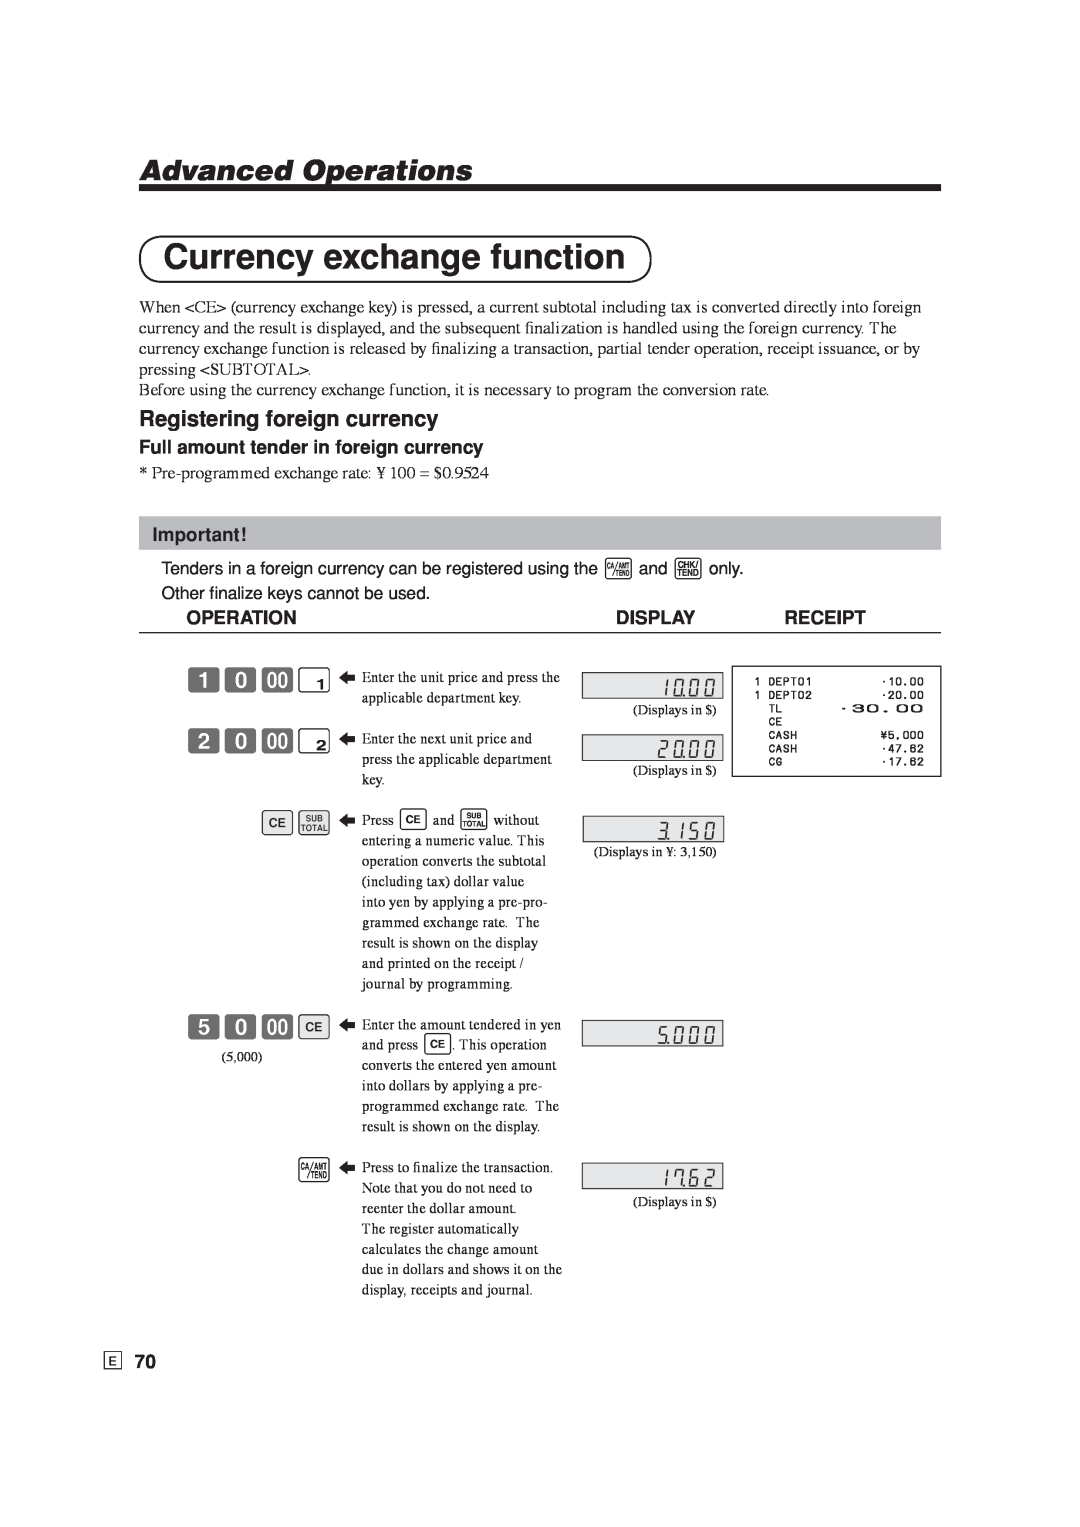 Casio SE-S6000 Currency exchange function, Registering foreign currency, 50-E, Full amount tender in foreign currency 